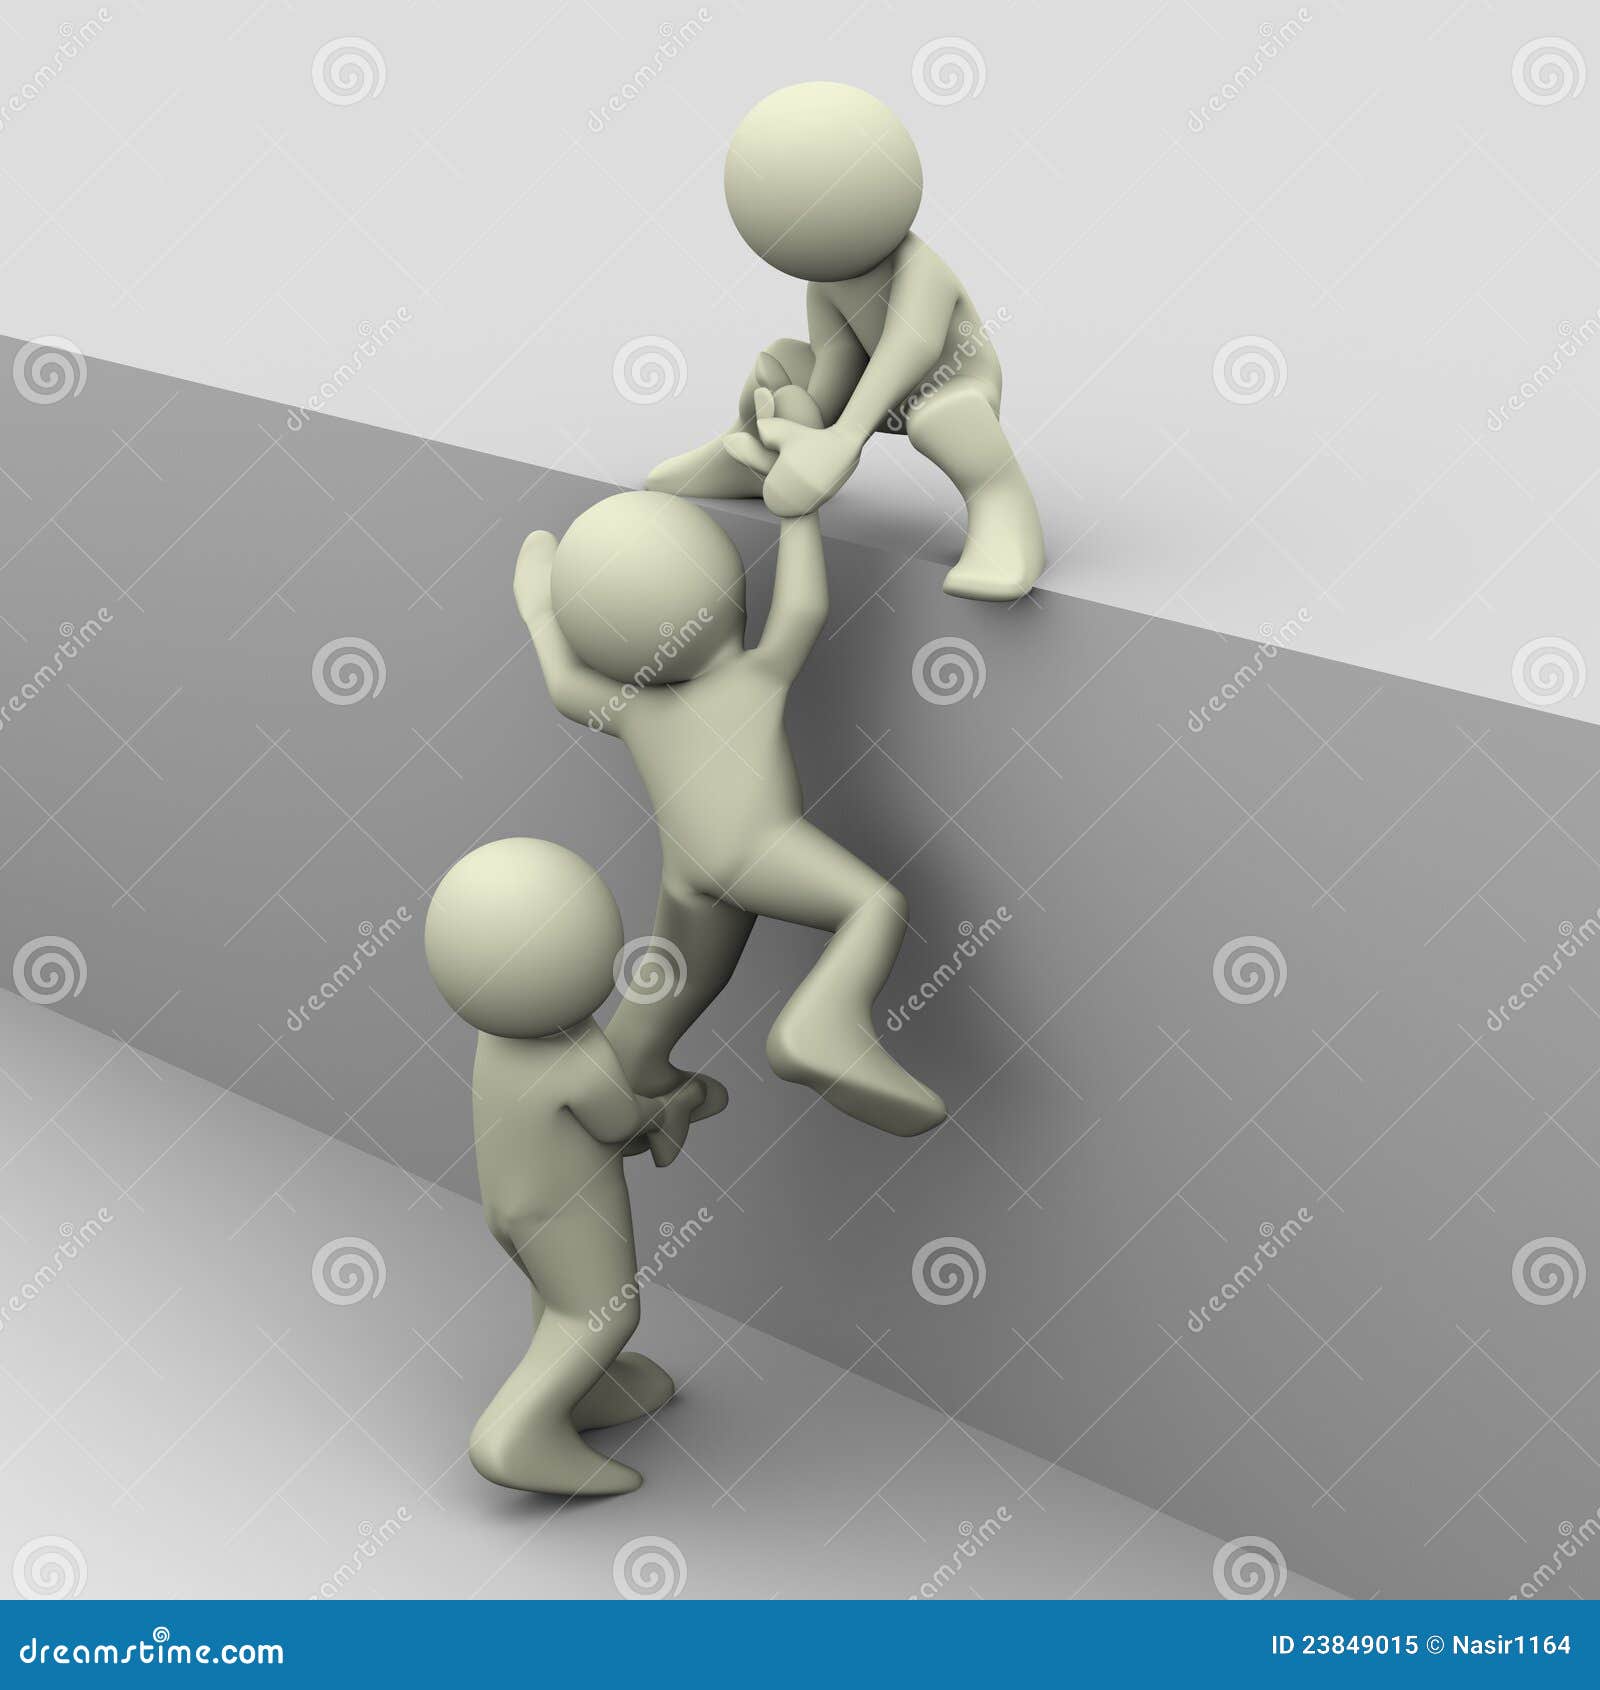 3d people helping stock illustration. Illustration of hold - 23849015